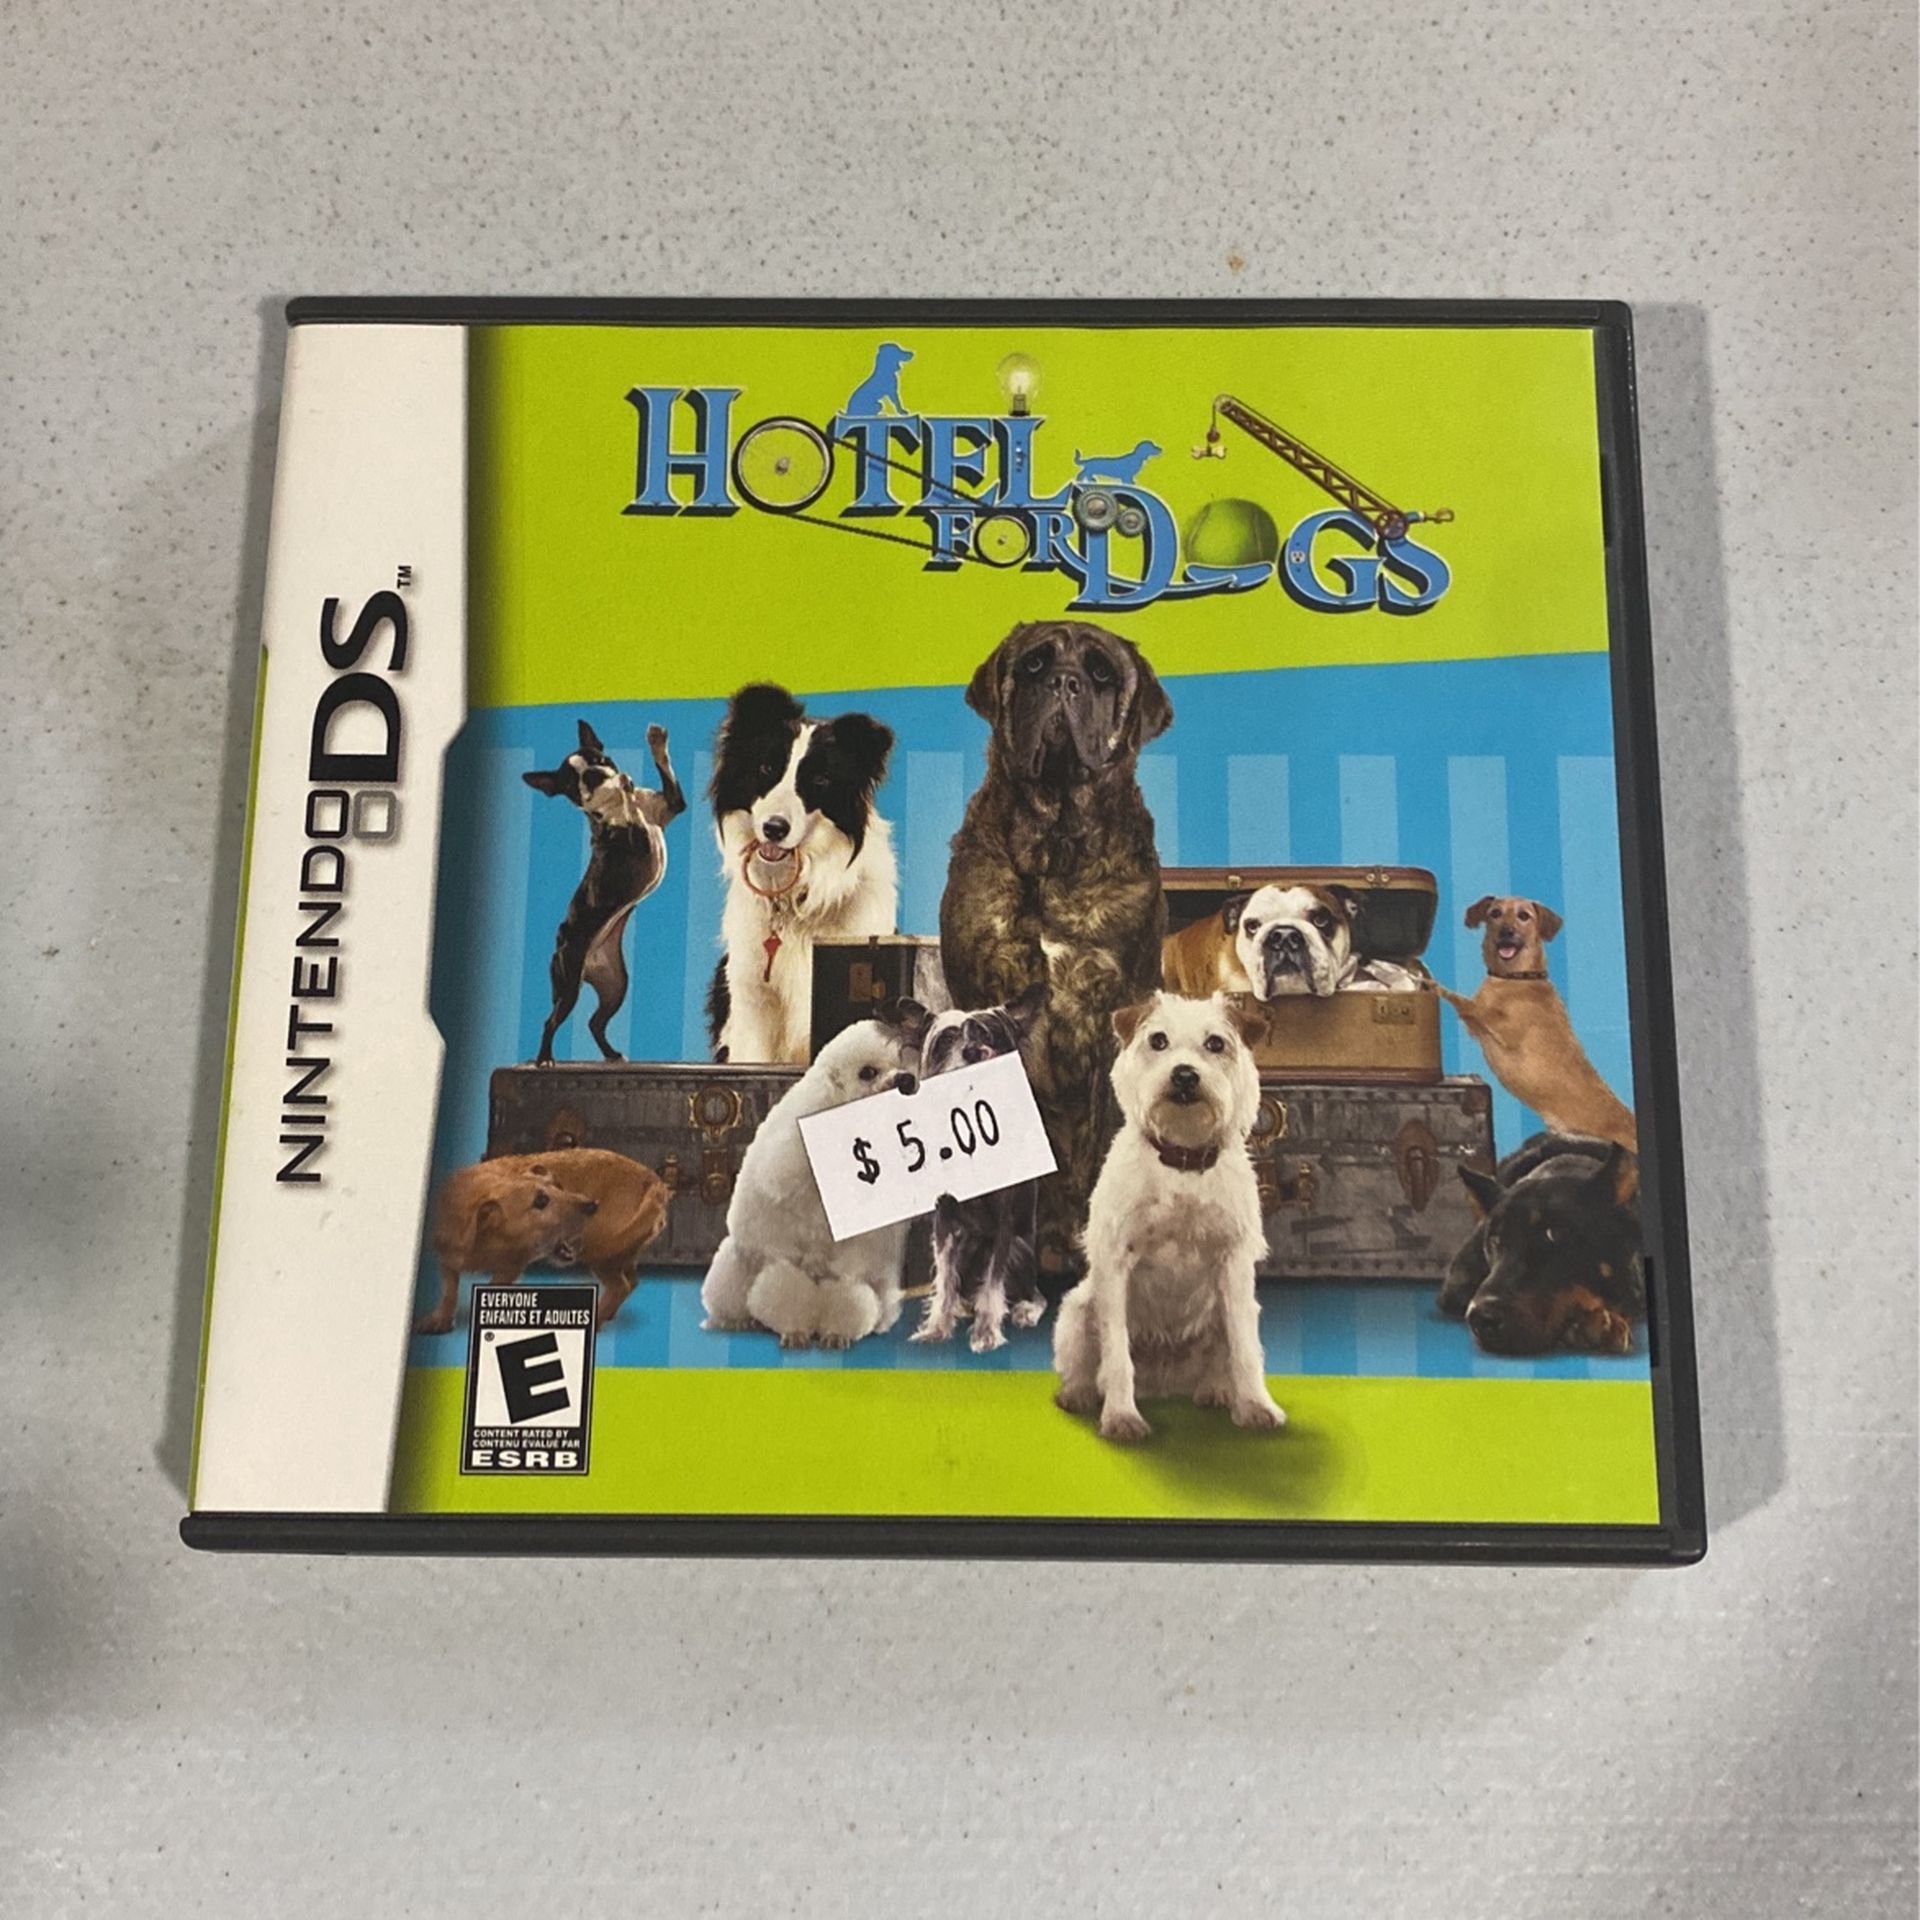 Hotel for Dogs (Nintendo DS, 2009)